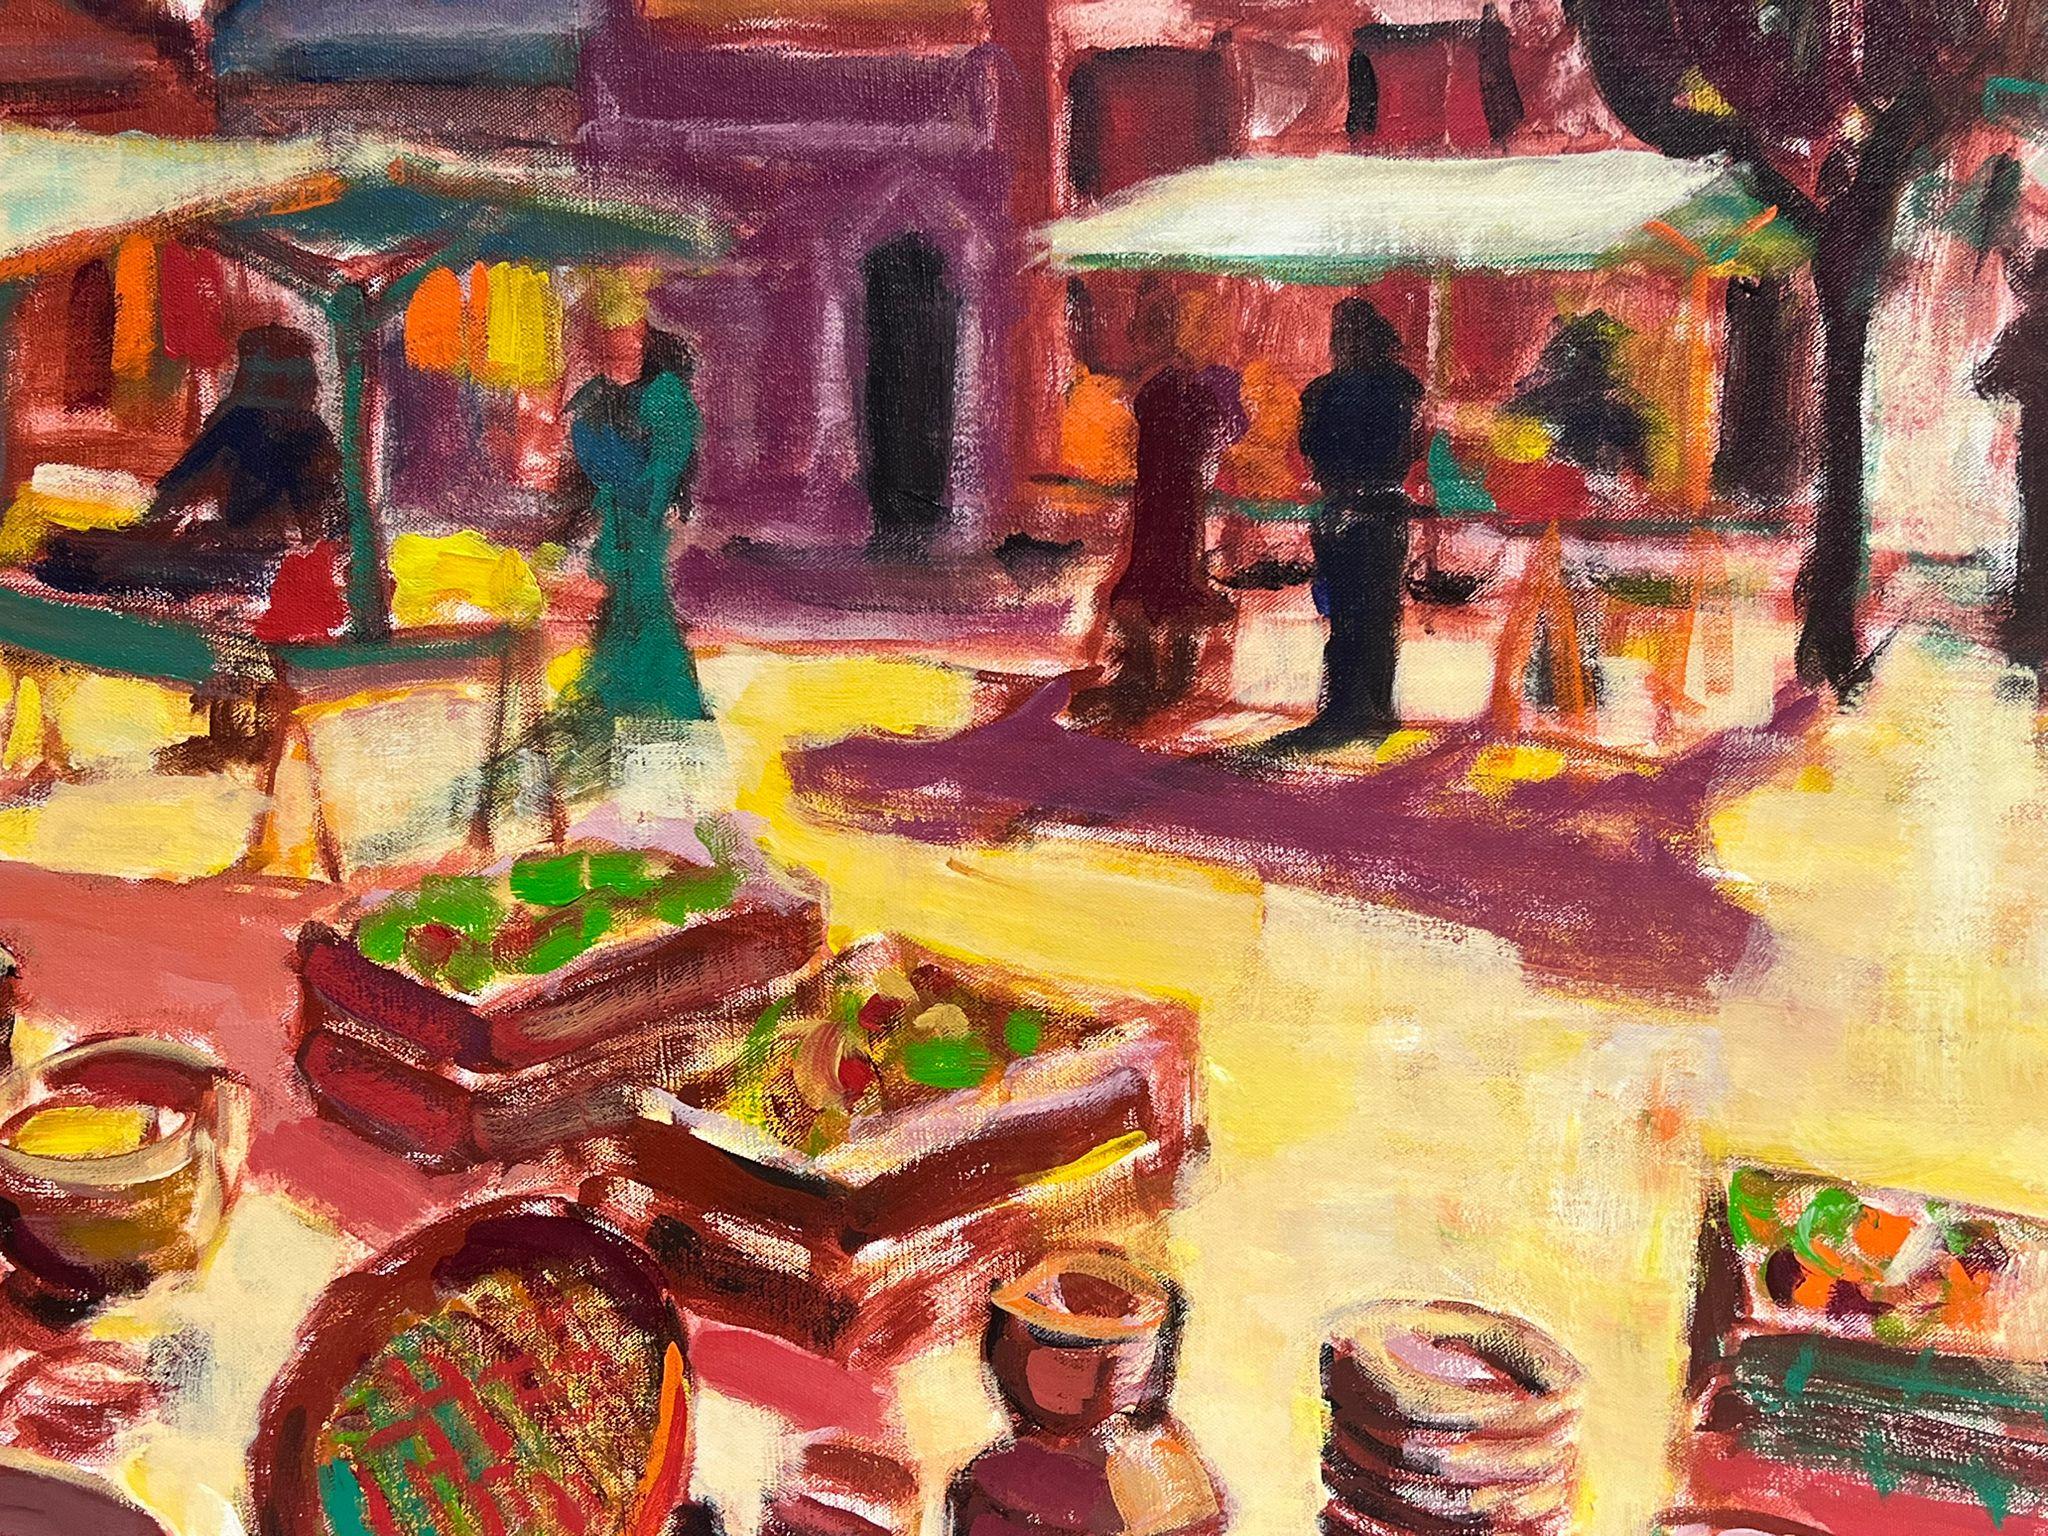 Huge 20th Century French Fauvist Oil Painting Sunny Hot Market Scene & Town For Sale 1